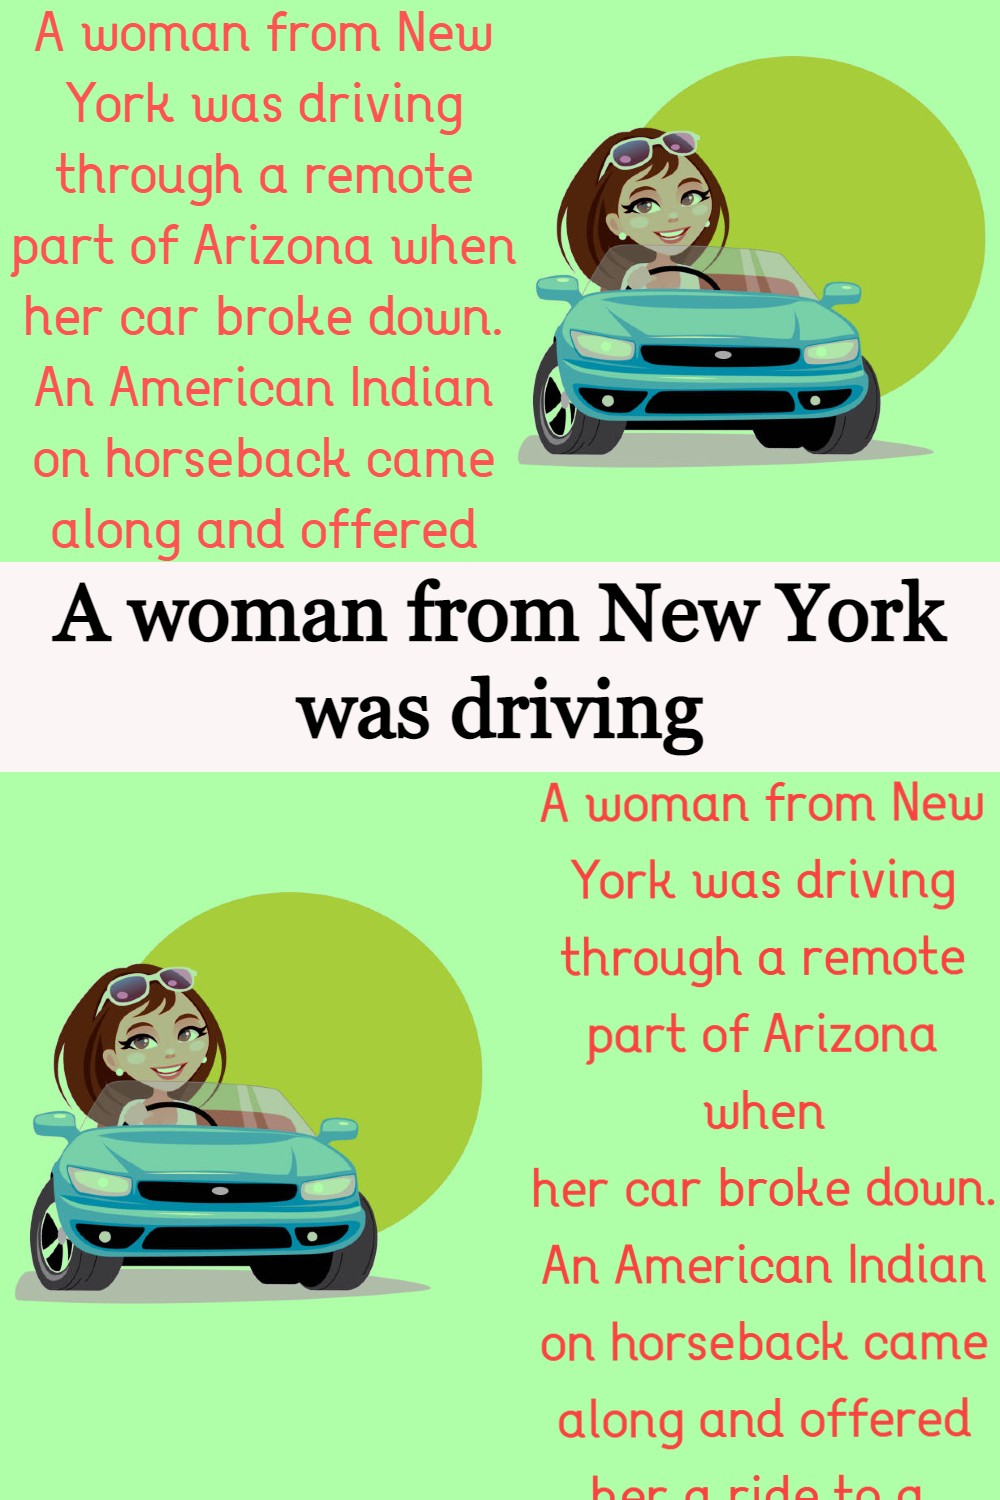 A woman from New York was driving